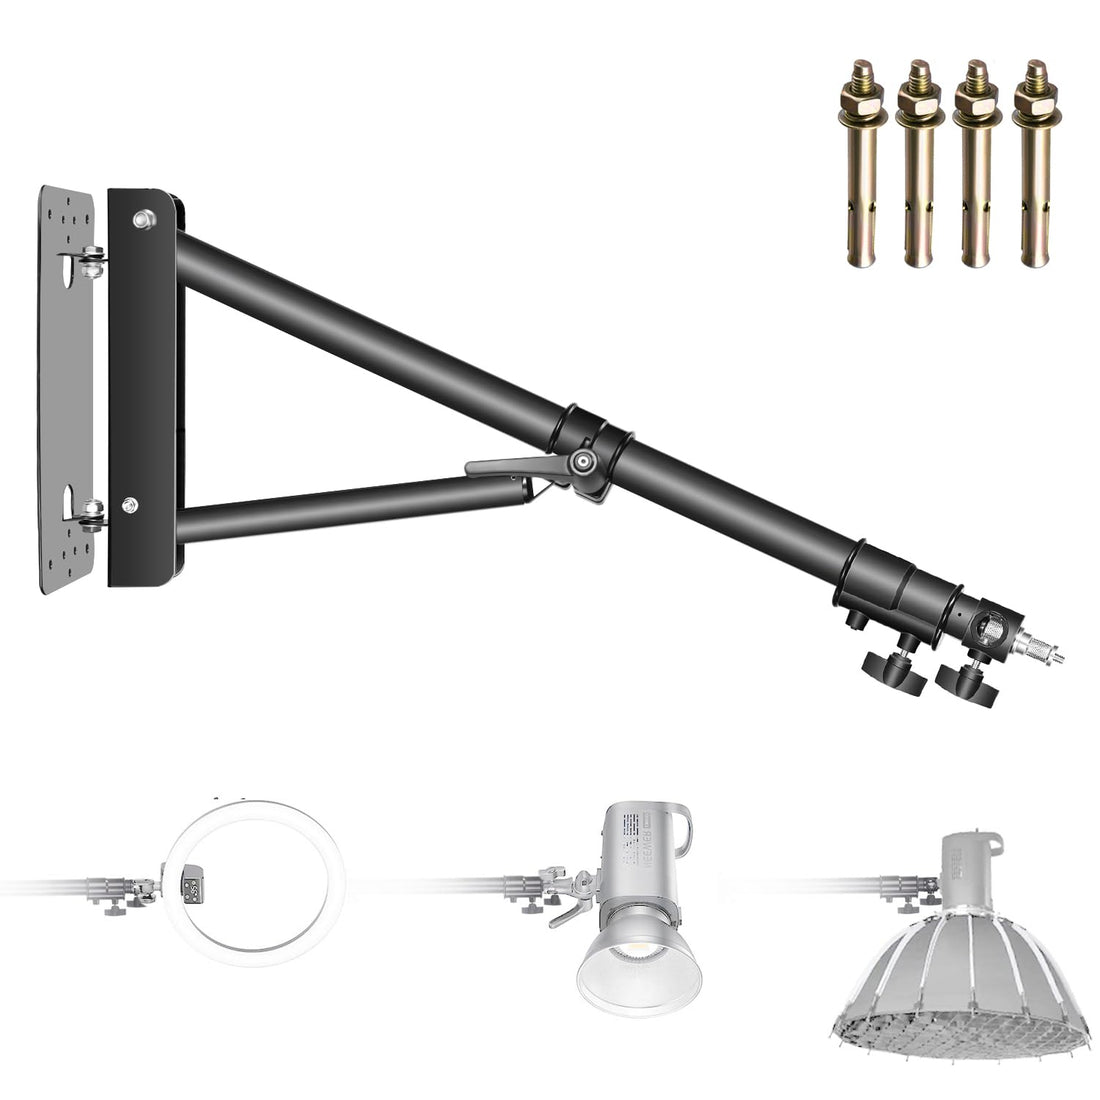 Neewer Triangle Wall Mounting Boom Arm for Photography Studio Video Strobe Lights Monolights Softboxes Umbrellas Reflectors,180 Degree Flexible Rotation,Max Length 70.8 inches/180 Centimeters (Black)